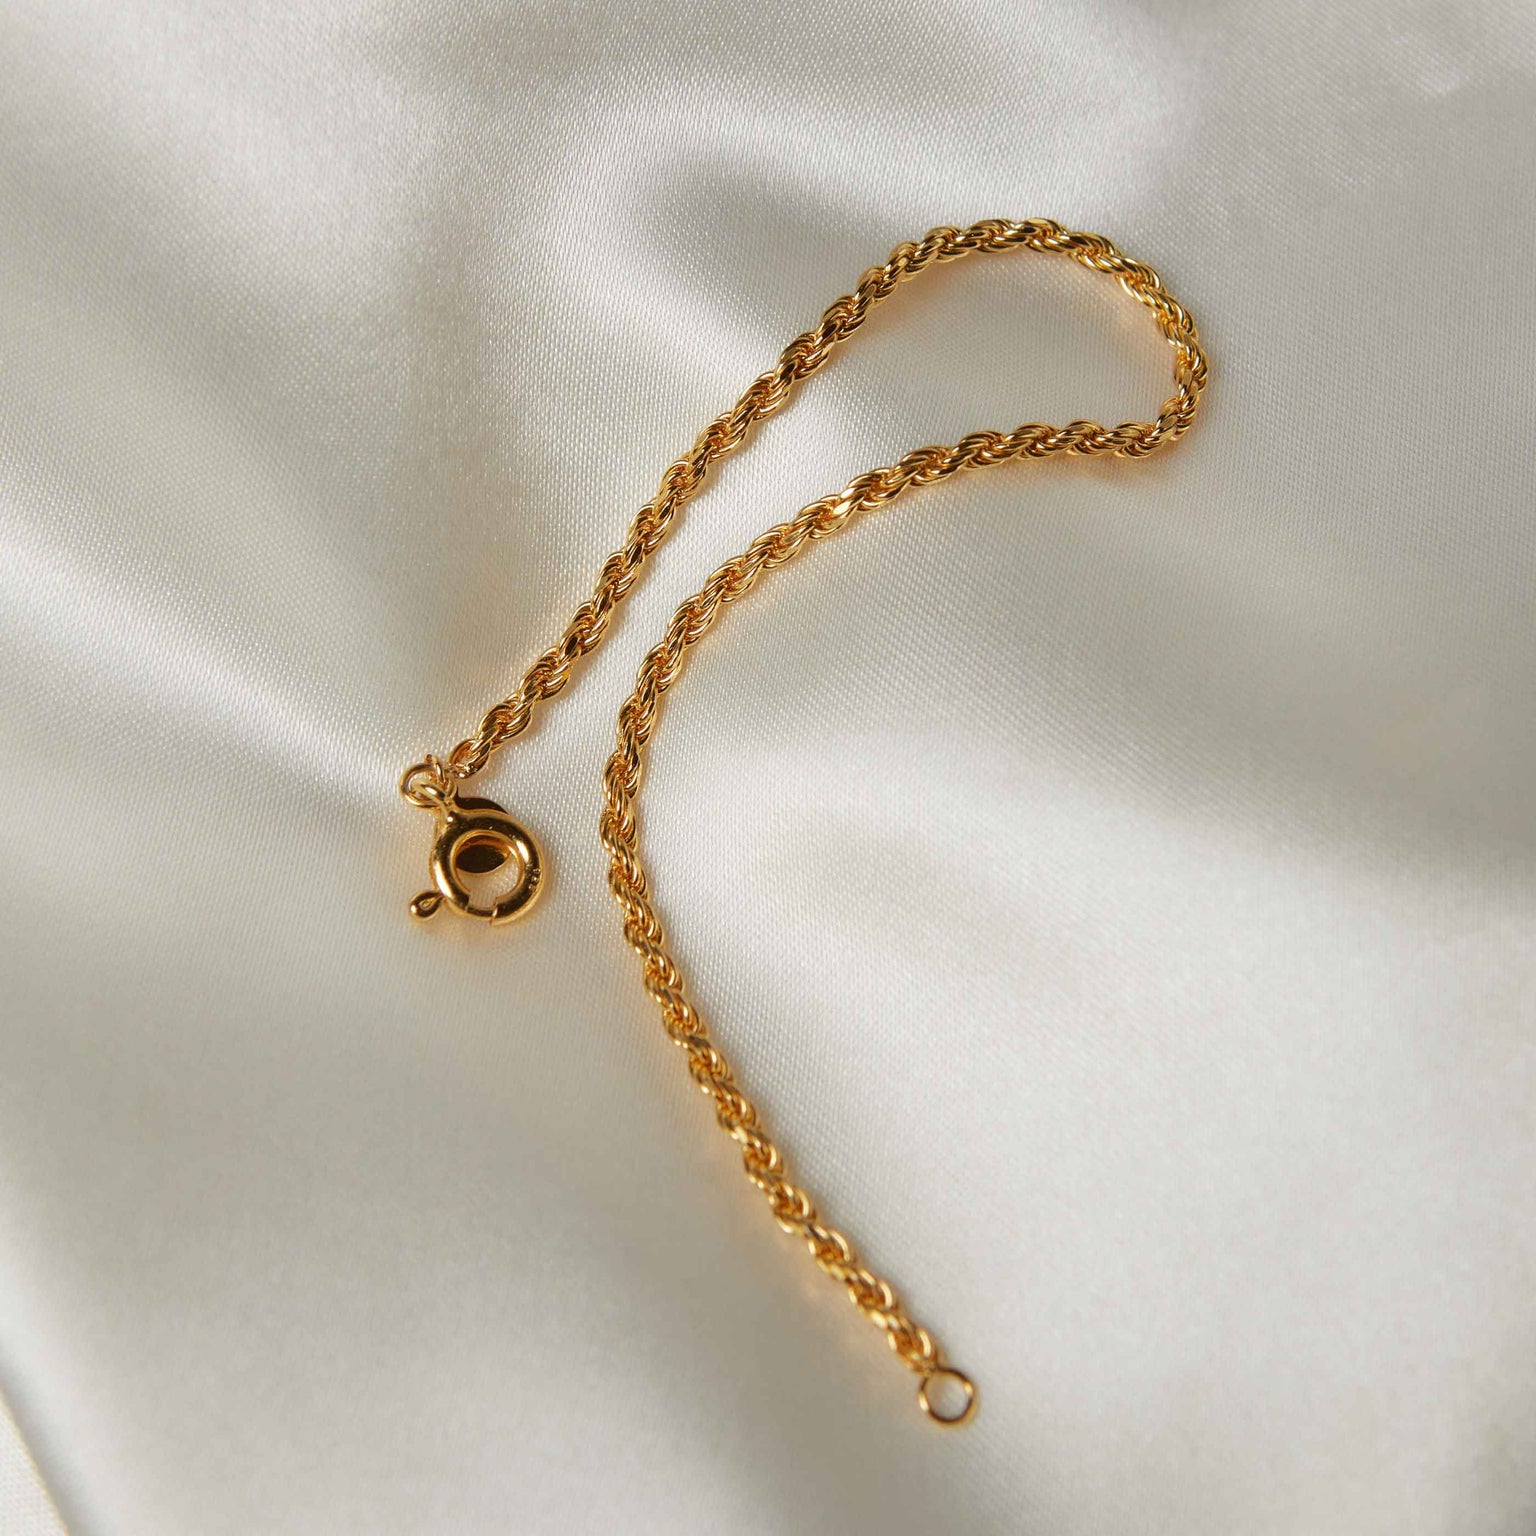 Flat lay shot of Rope Chain Bracelet in Gold